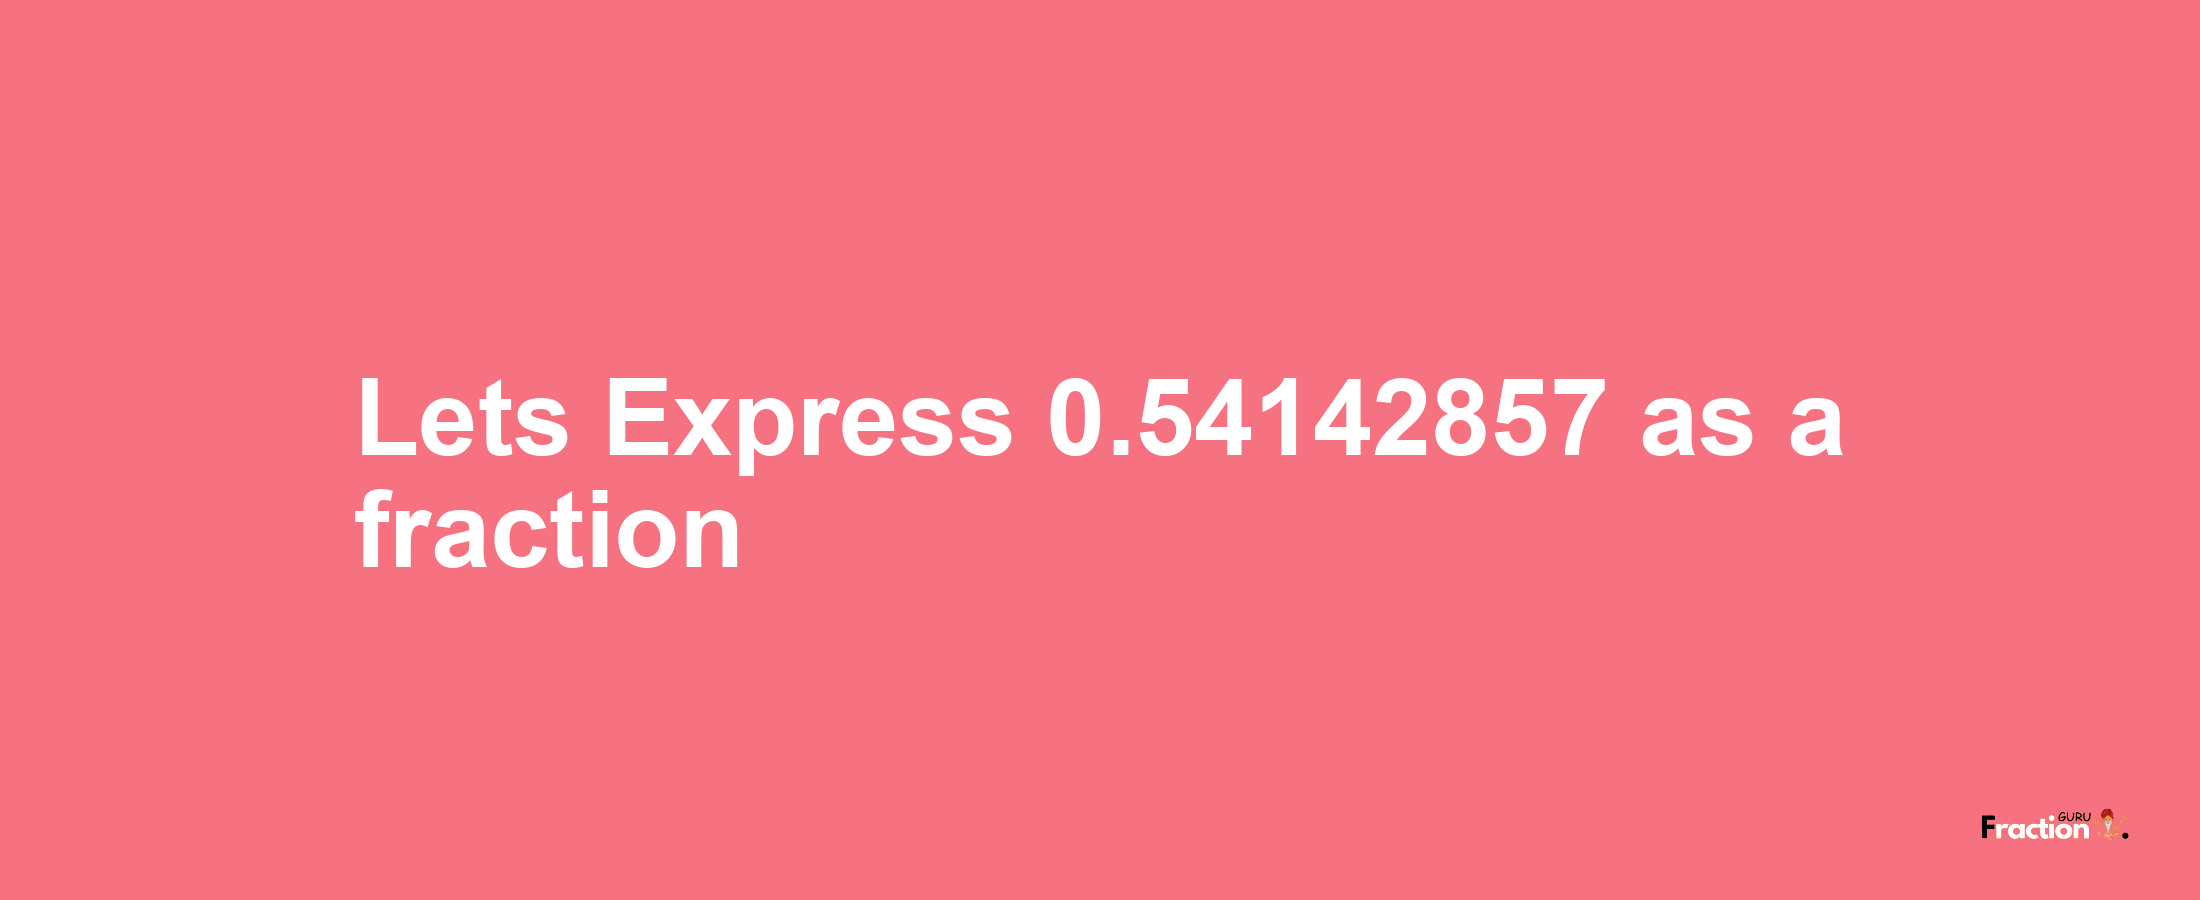 Lets Express 0.54142857 as afraction